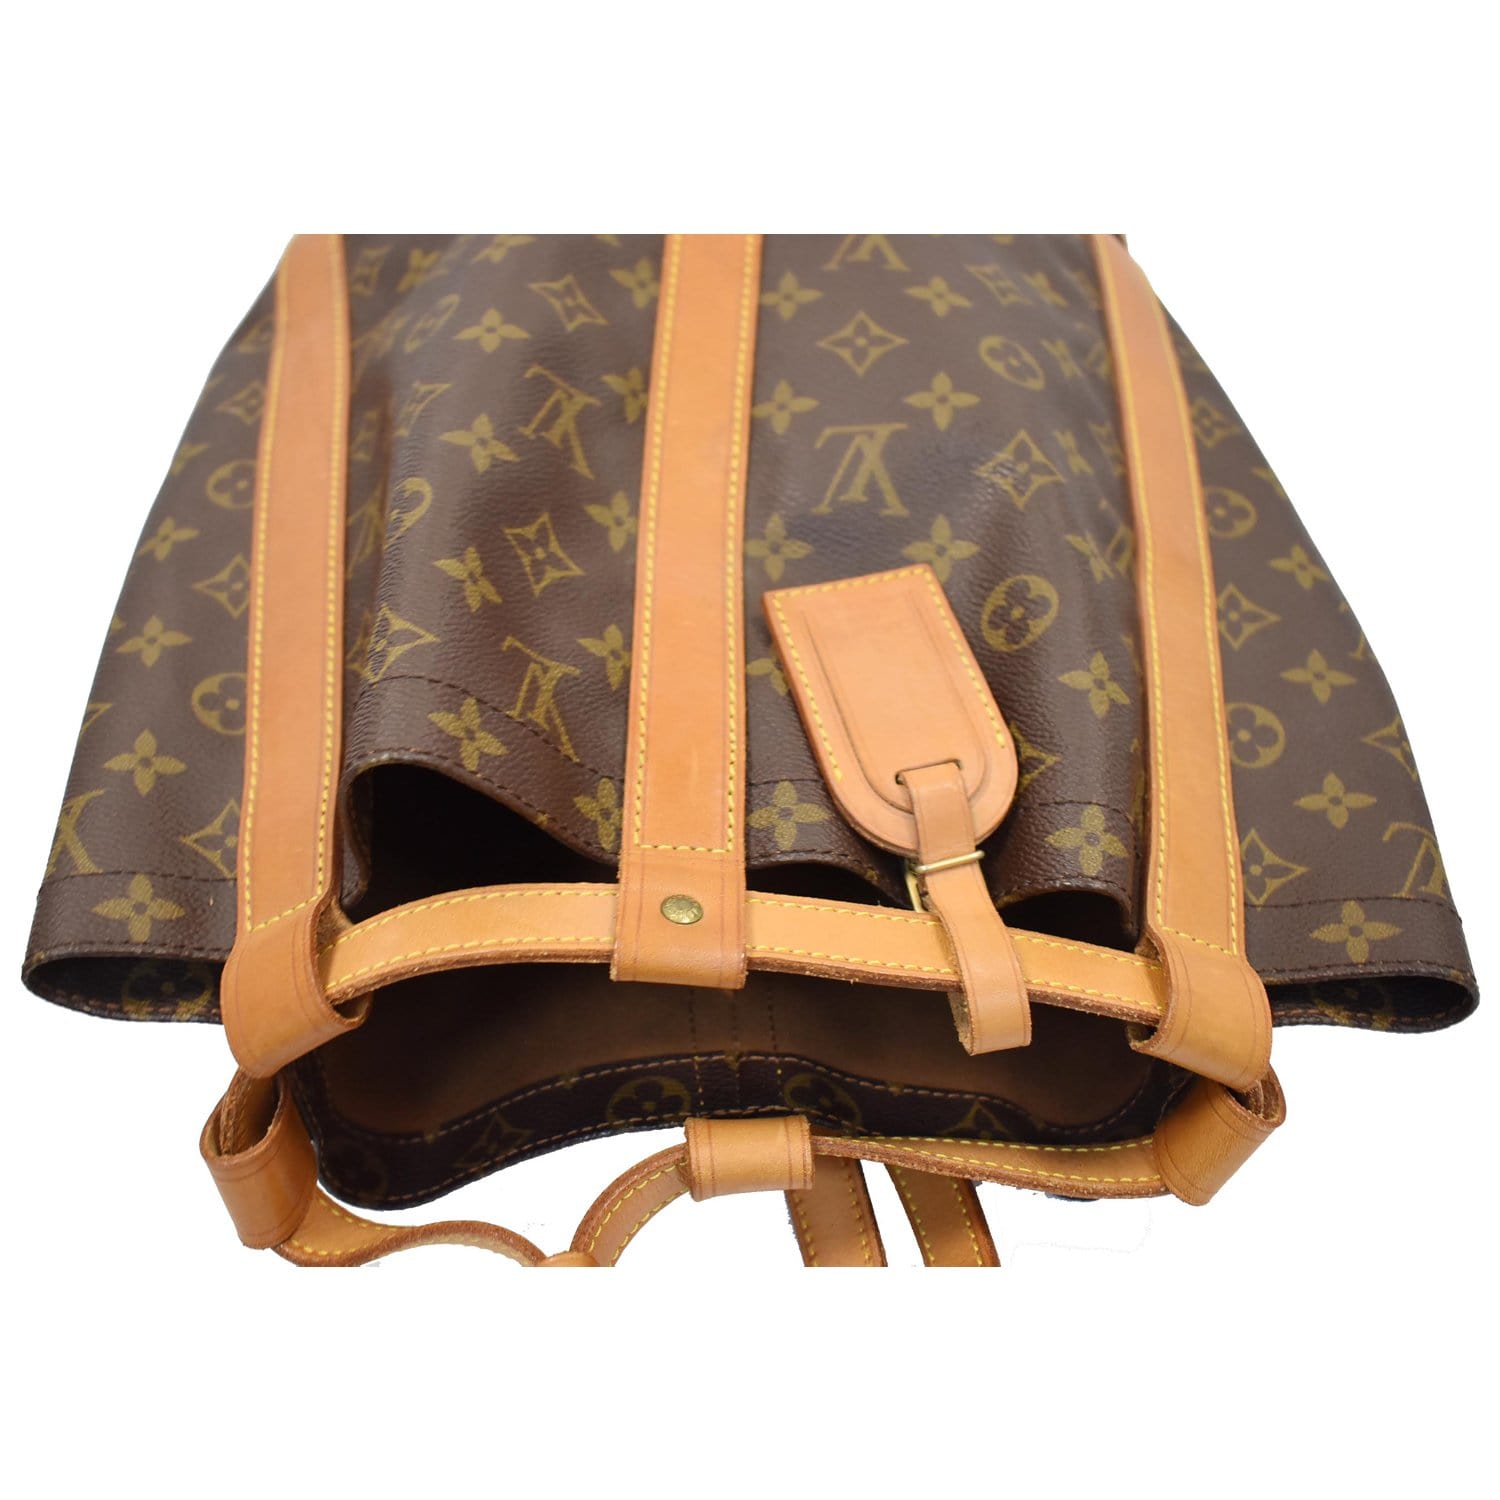 Louis Vuitton Outdoor Backpack Limited Edition Monogram Canvas Brown 1622332